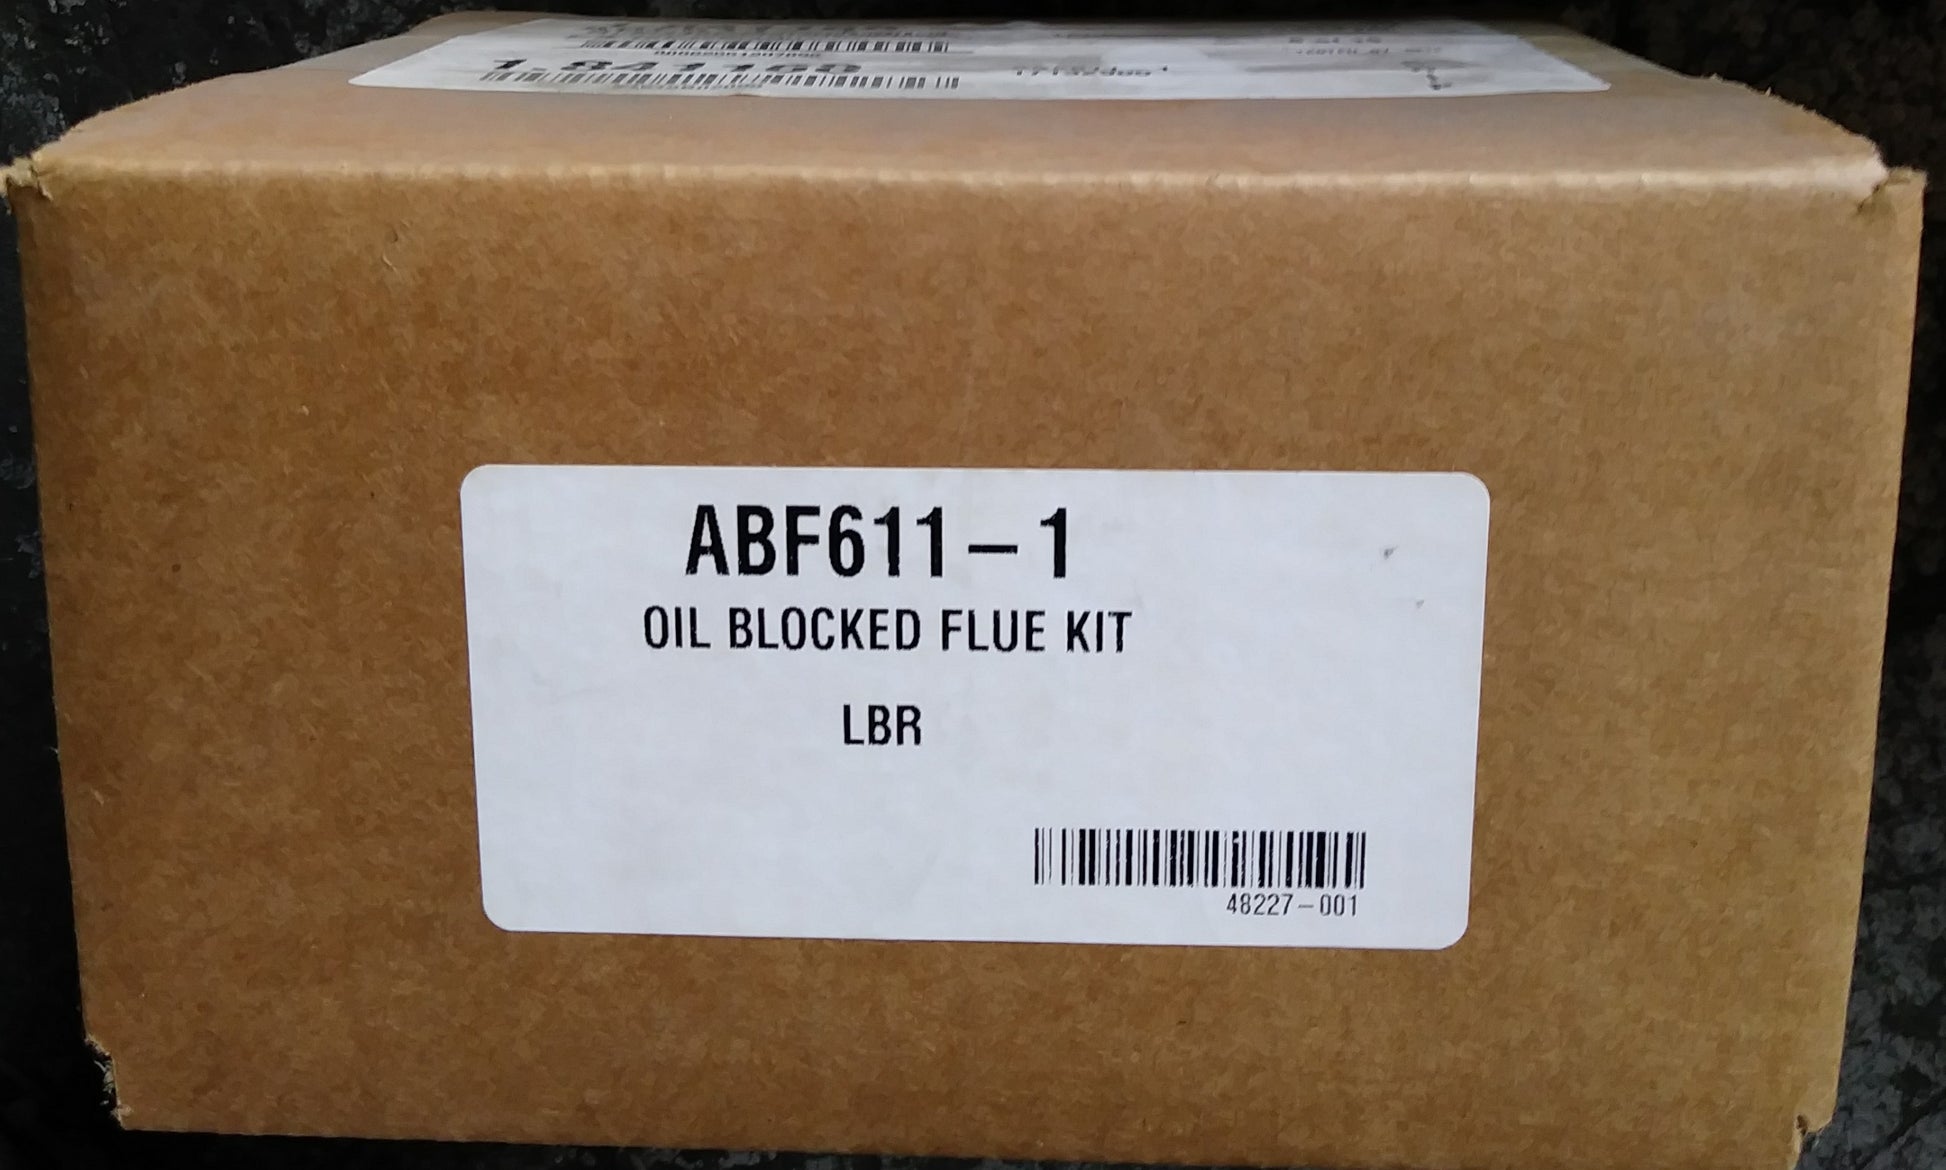 OIL BLOCKED FLUE SAFETY SWITCH KIT FOR USE w/REAR FLUE BASEMENT STYLE OIL FURNACES